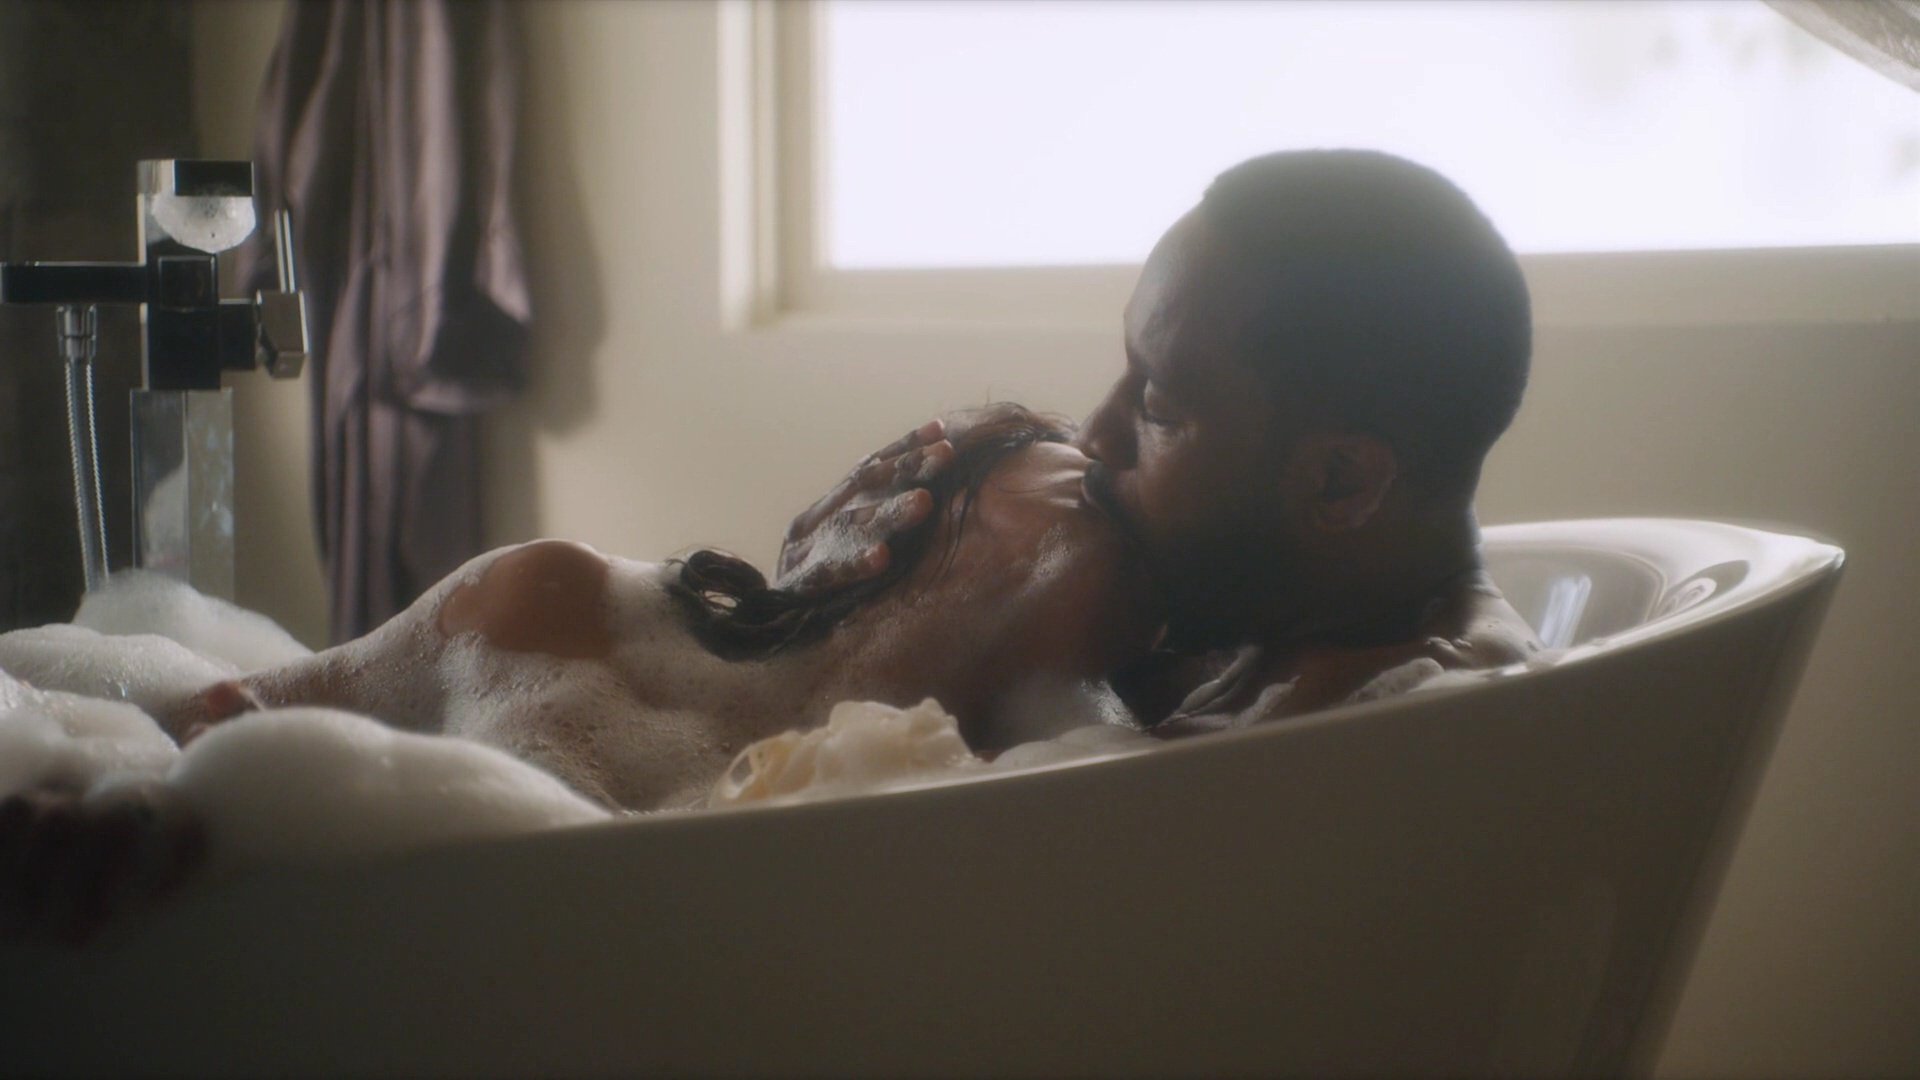 Watch new Robin Givens nude (covered) sex scene from "Ambitions" ...